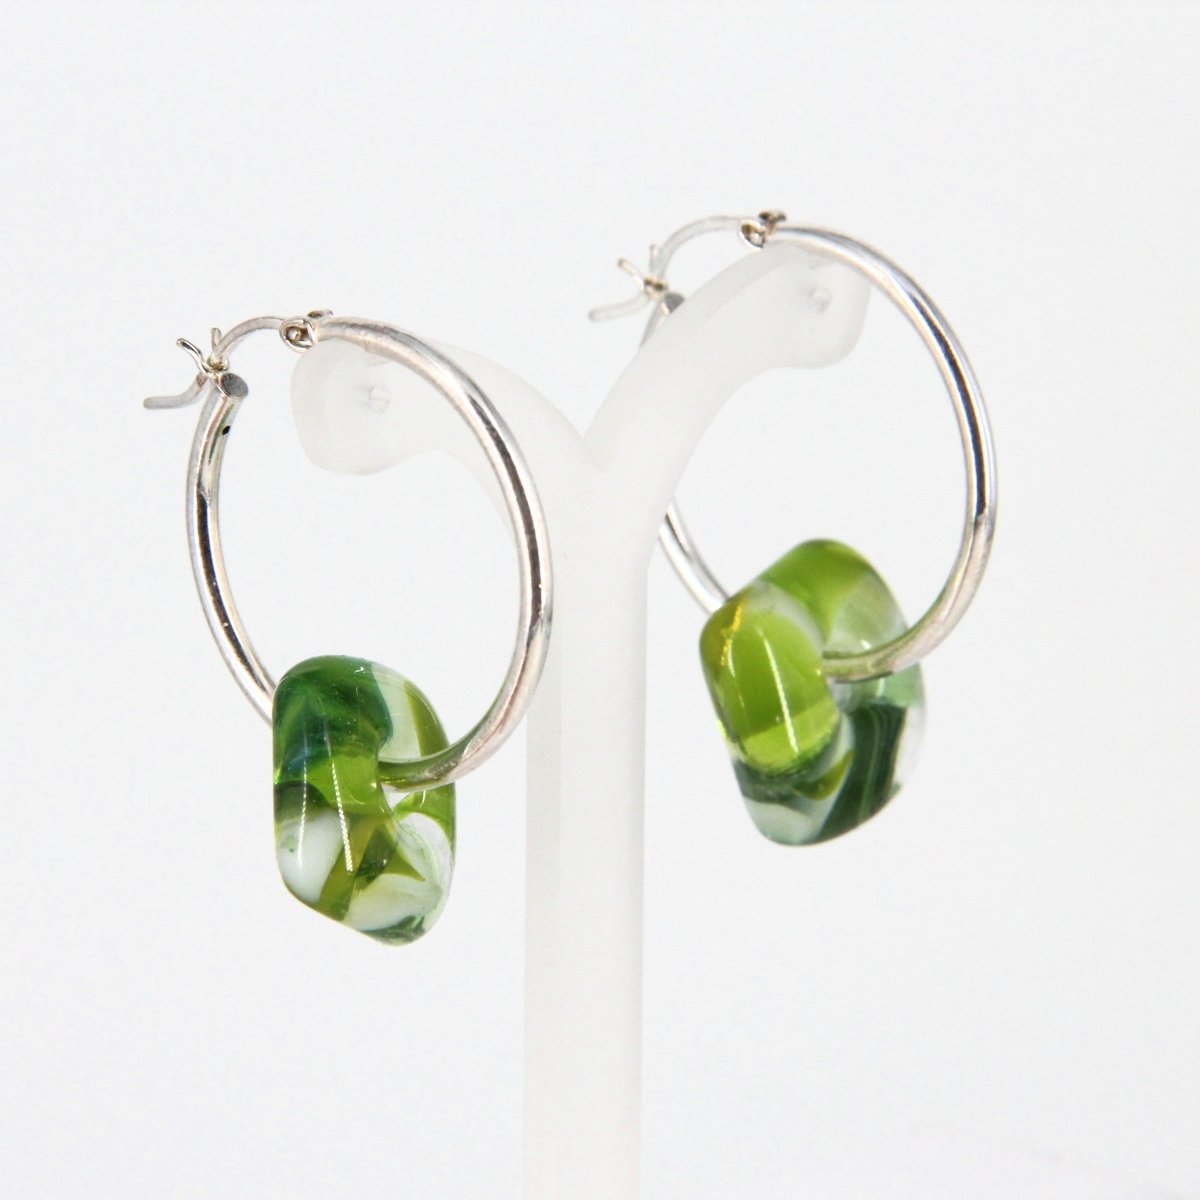 Silver Hoop Earrings with Green Glass Donuts